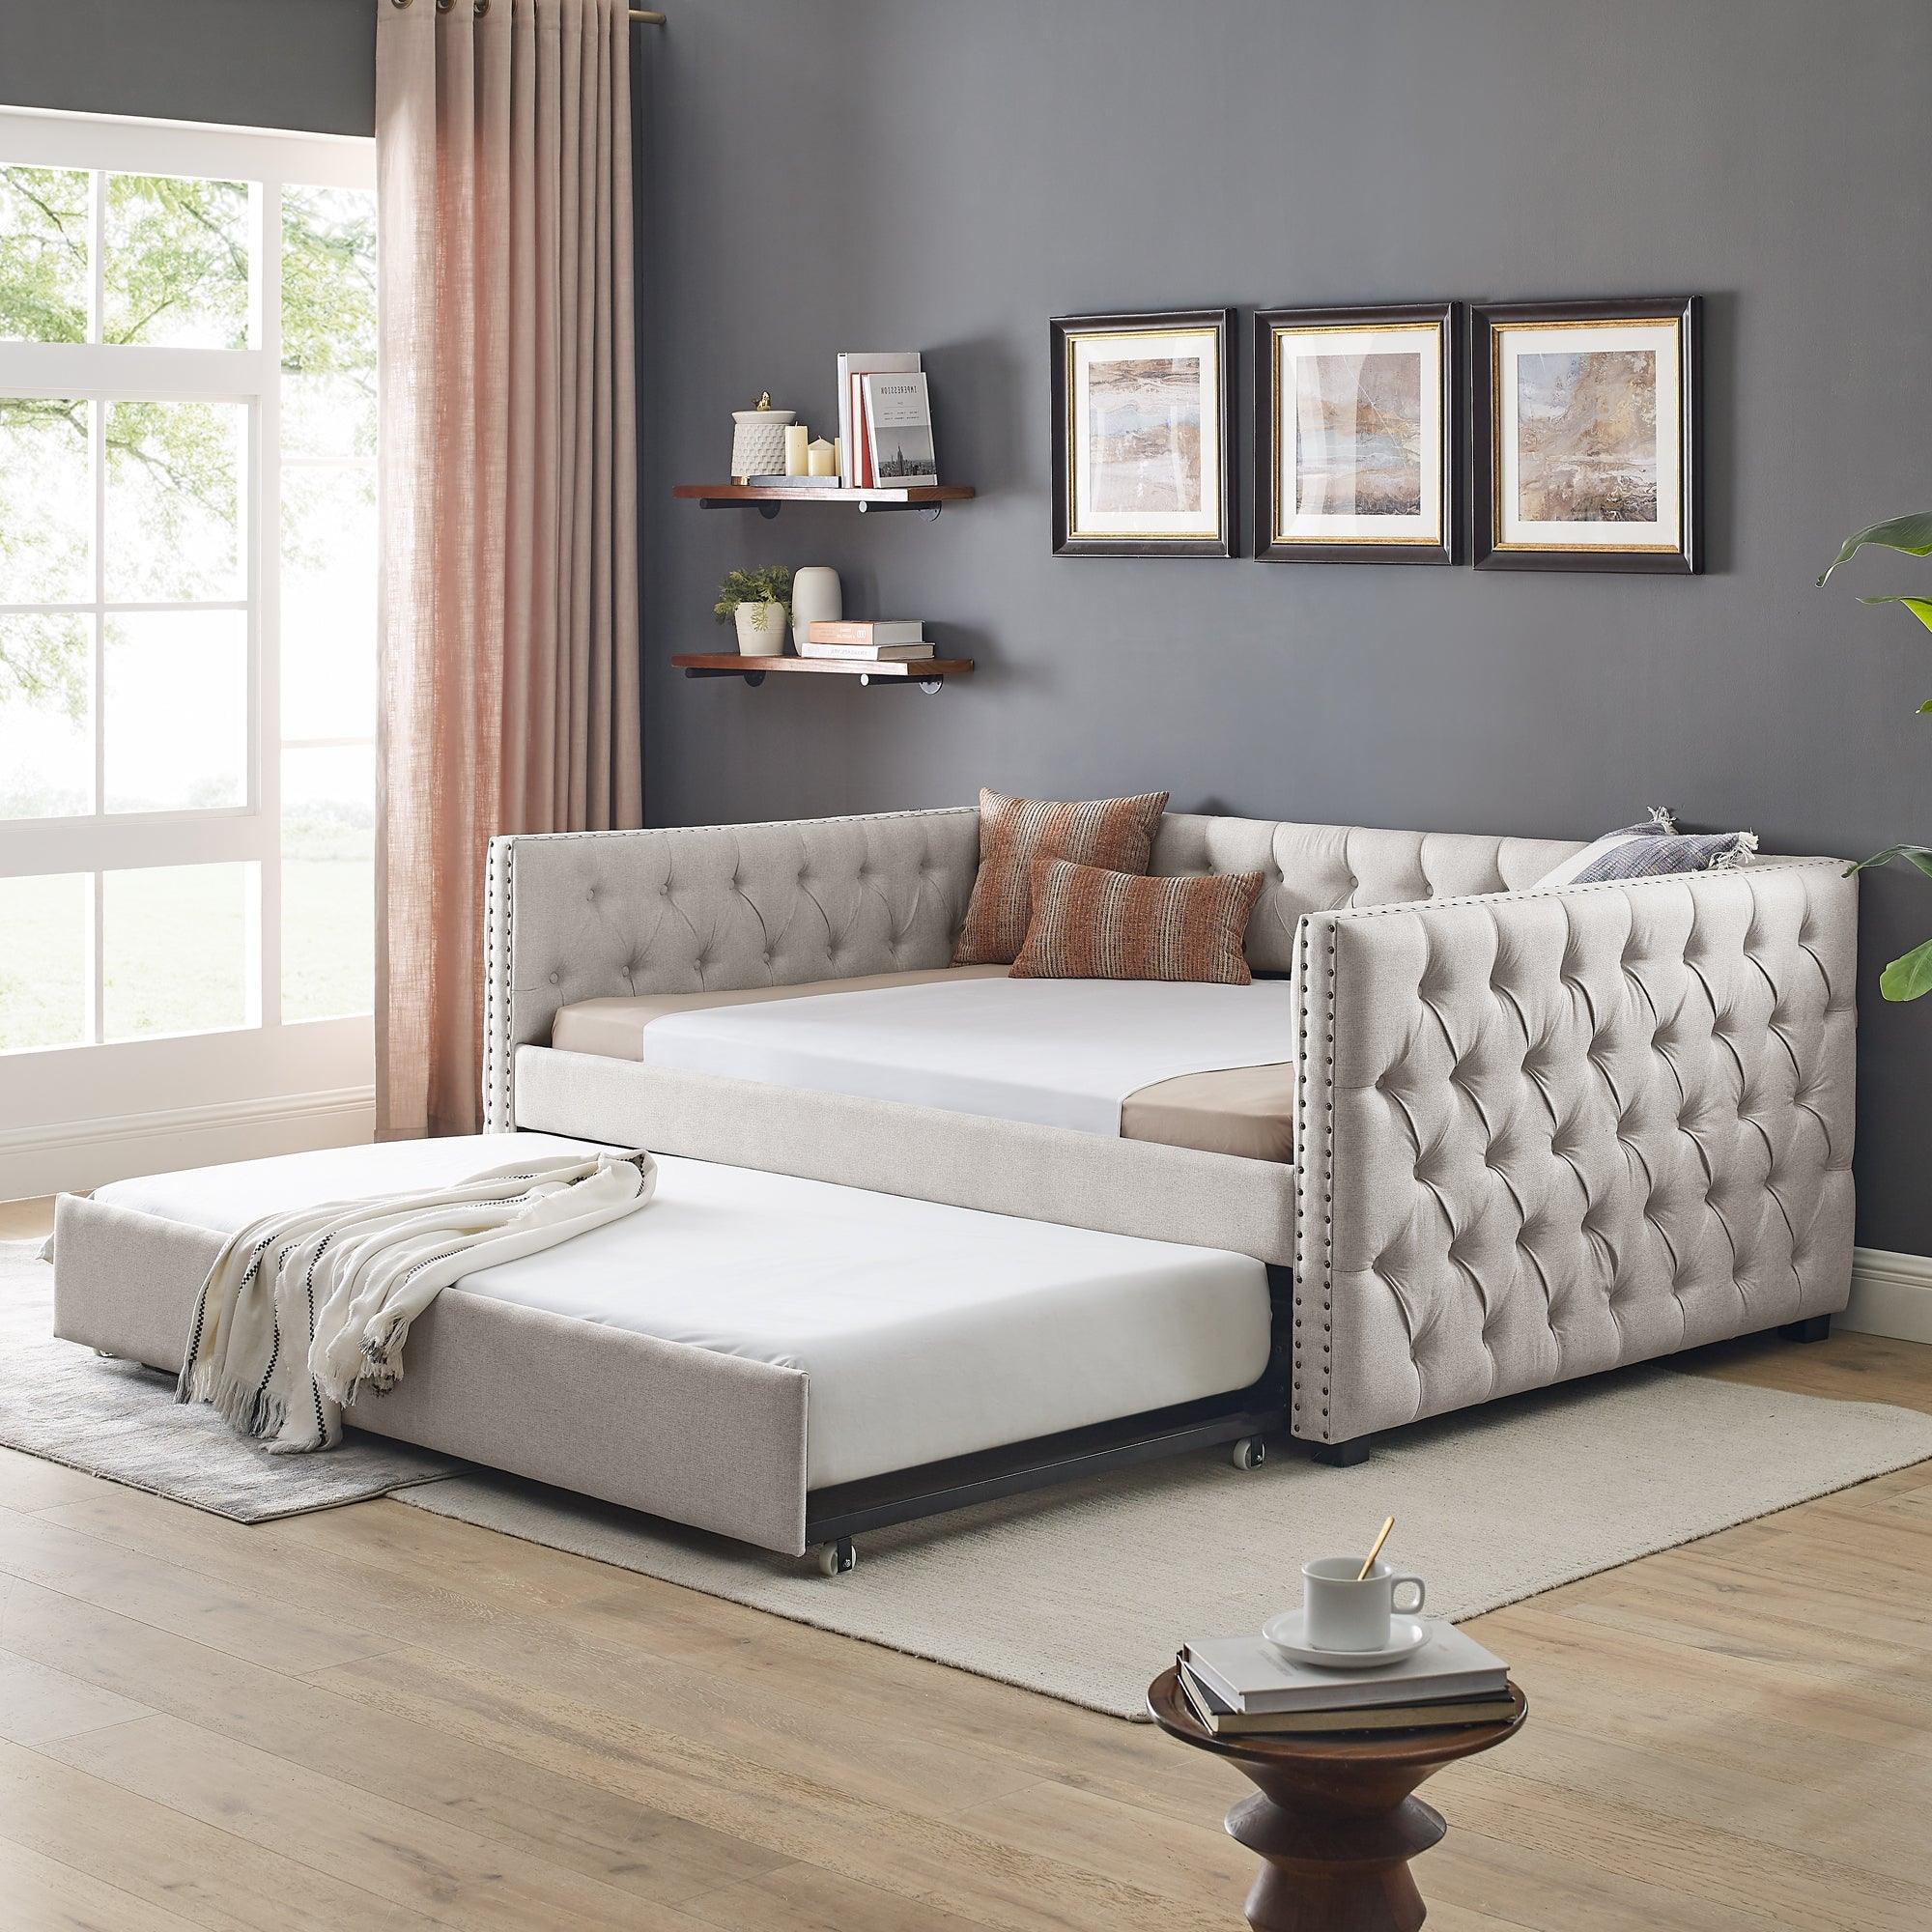 Daybed With Trundle Upholstered Tufted Sofa Bed, With Button And Copper Nail On Square Arms?Full Daybed & Twin Trundle, Beige?85“X57”X31.5“? LamCham